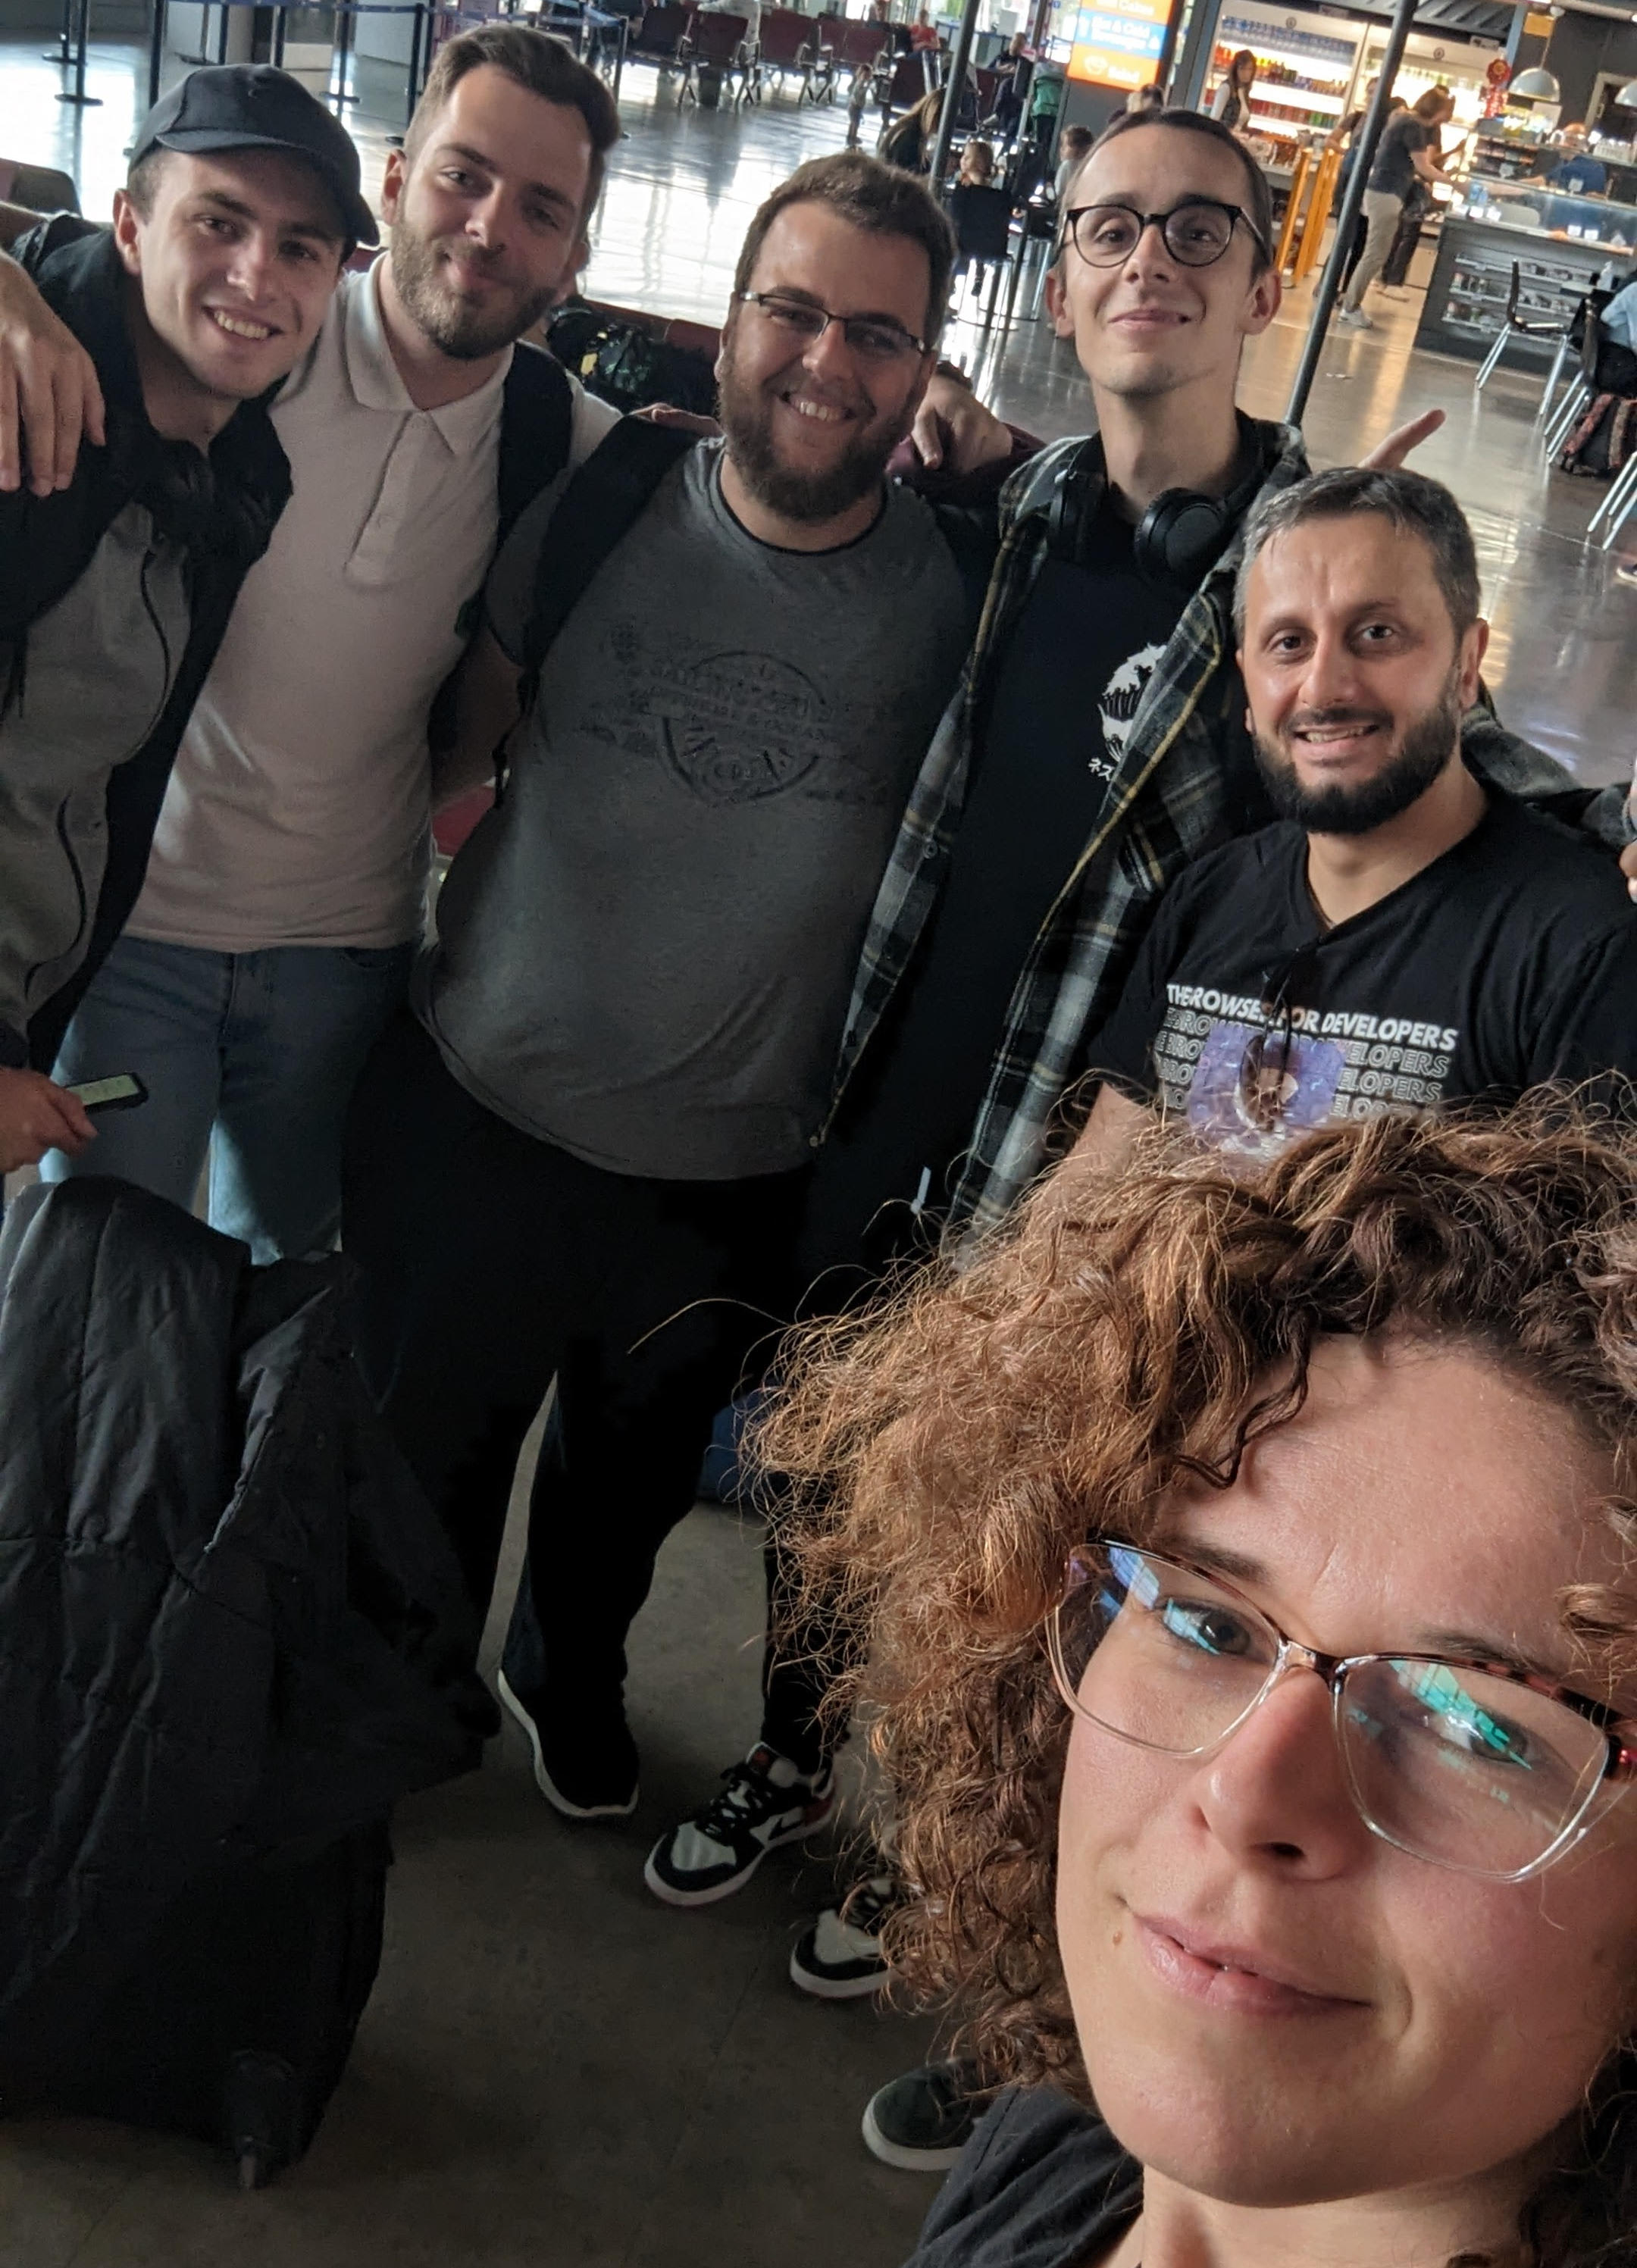 Team DeveD and community members at the airport